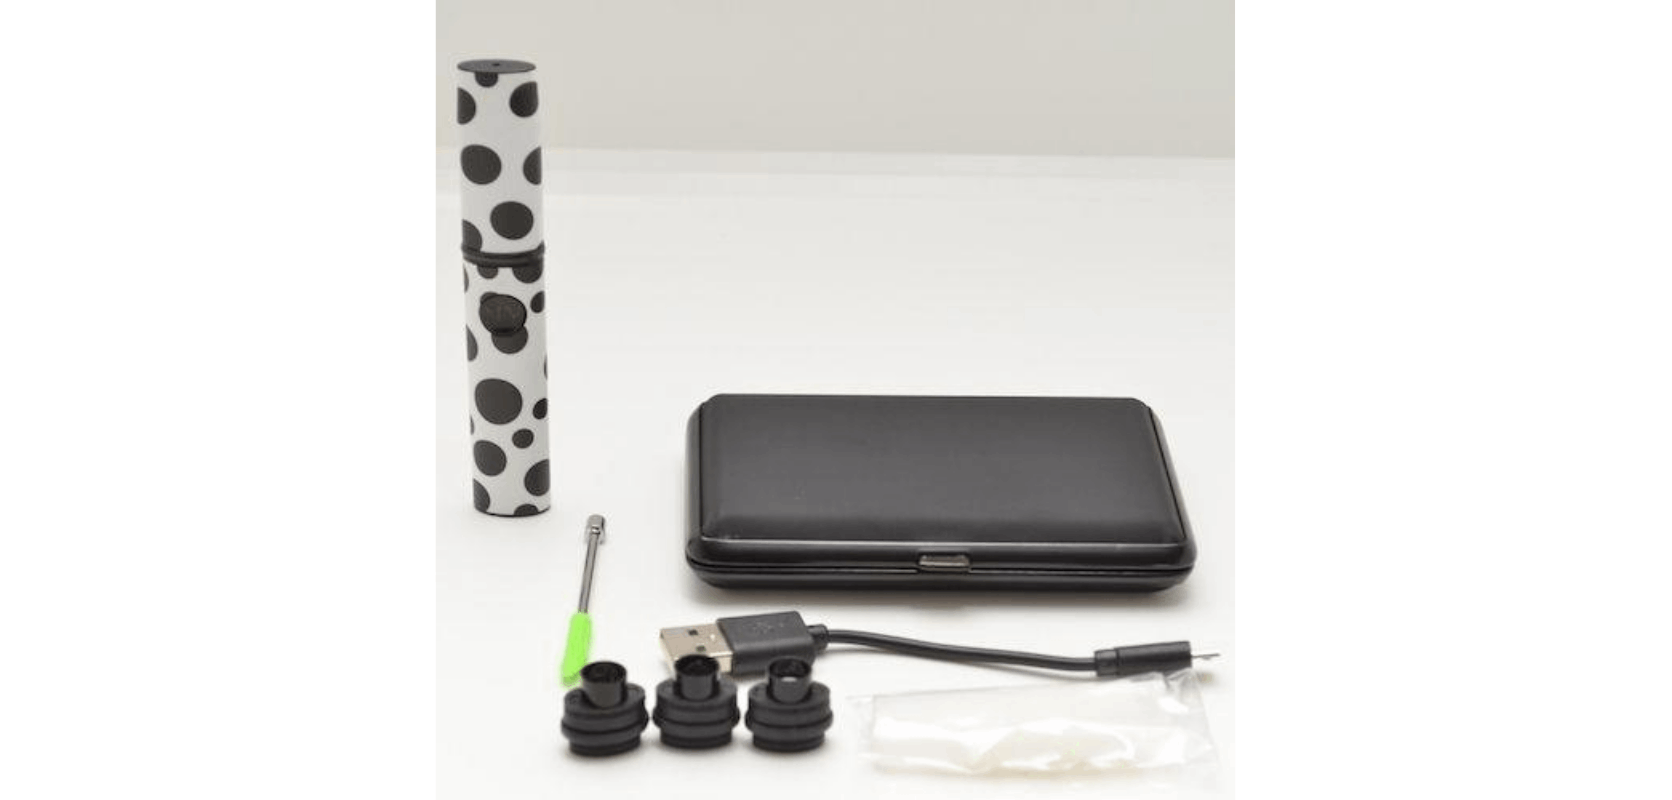 Essentially, a vape kit will provide you with everything necessary to start vaping. Your vape will include a mouthpiece, a tank, a coil, and a battery. 